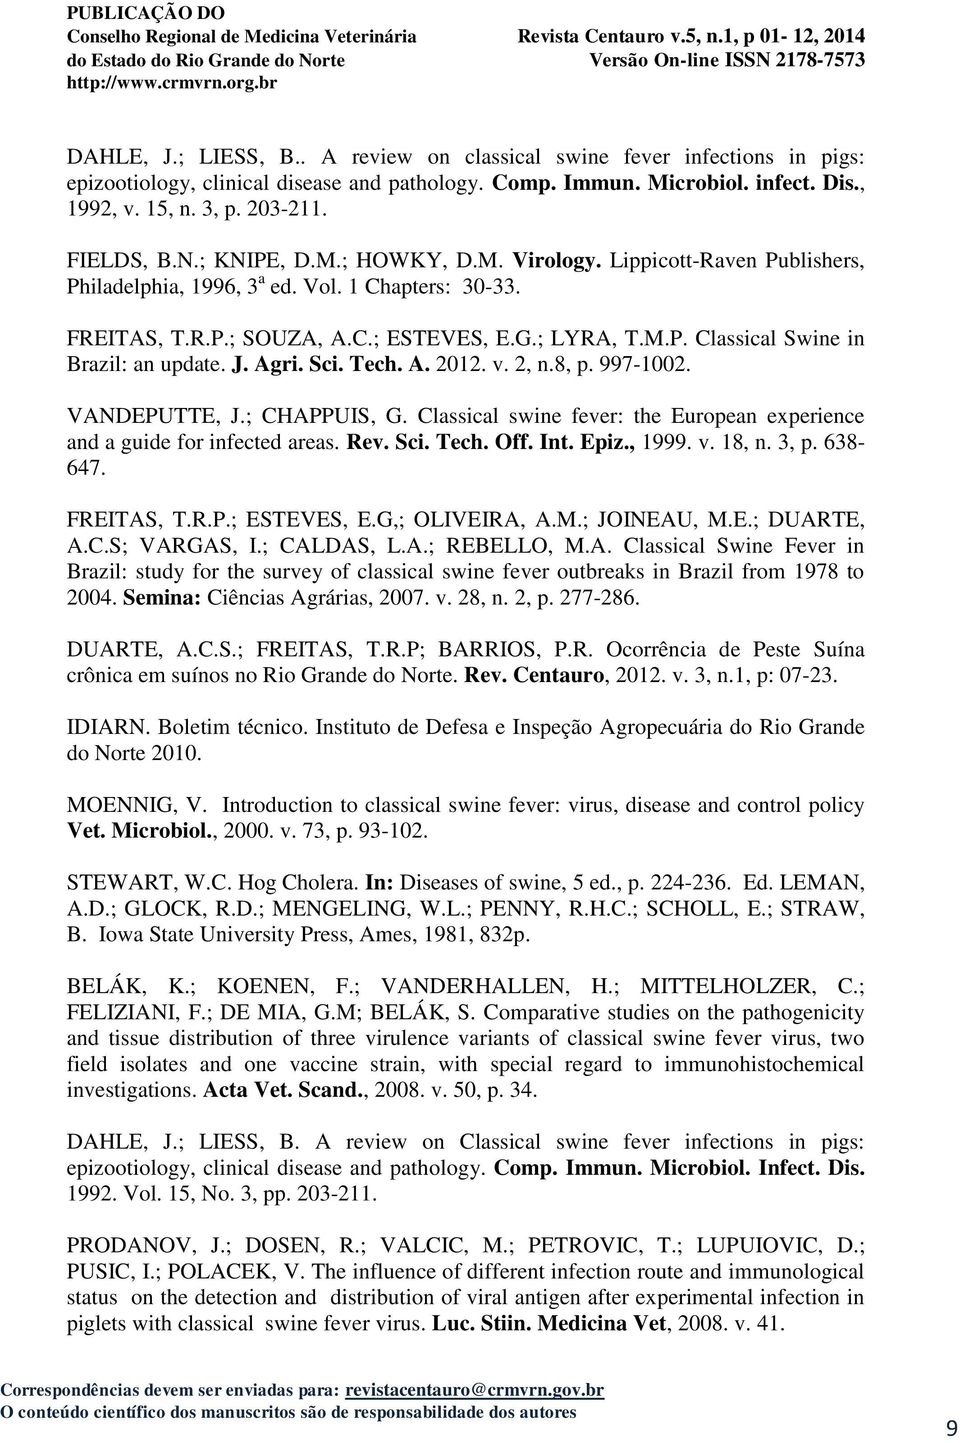 J. Agri. Sci. Tech. A. 2012. v. 2, n.8, p. 997-1002. VANDEPUTTE, J.; CHAPPUIS, G. Classical swine fever: the European experience and a guide for infected areas. Rev. Sci. Tech. Off. Int. Epiz., 1999.